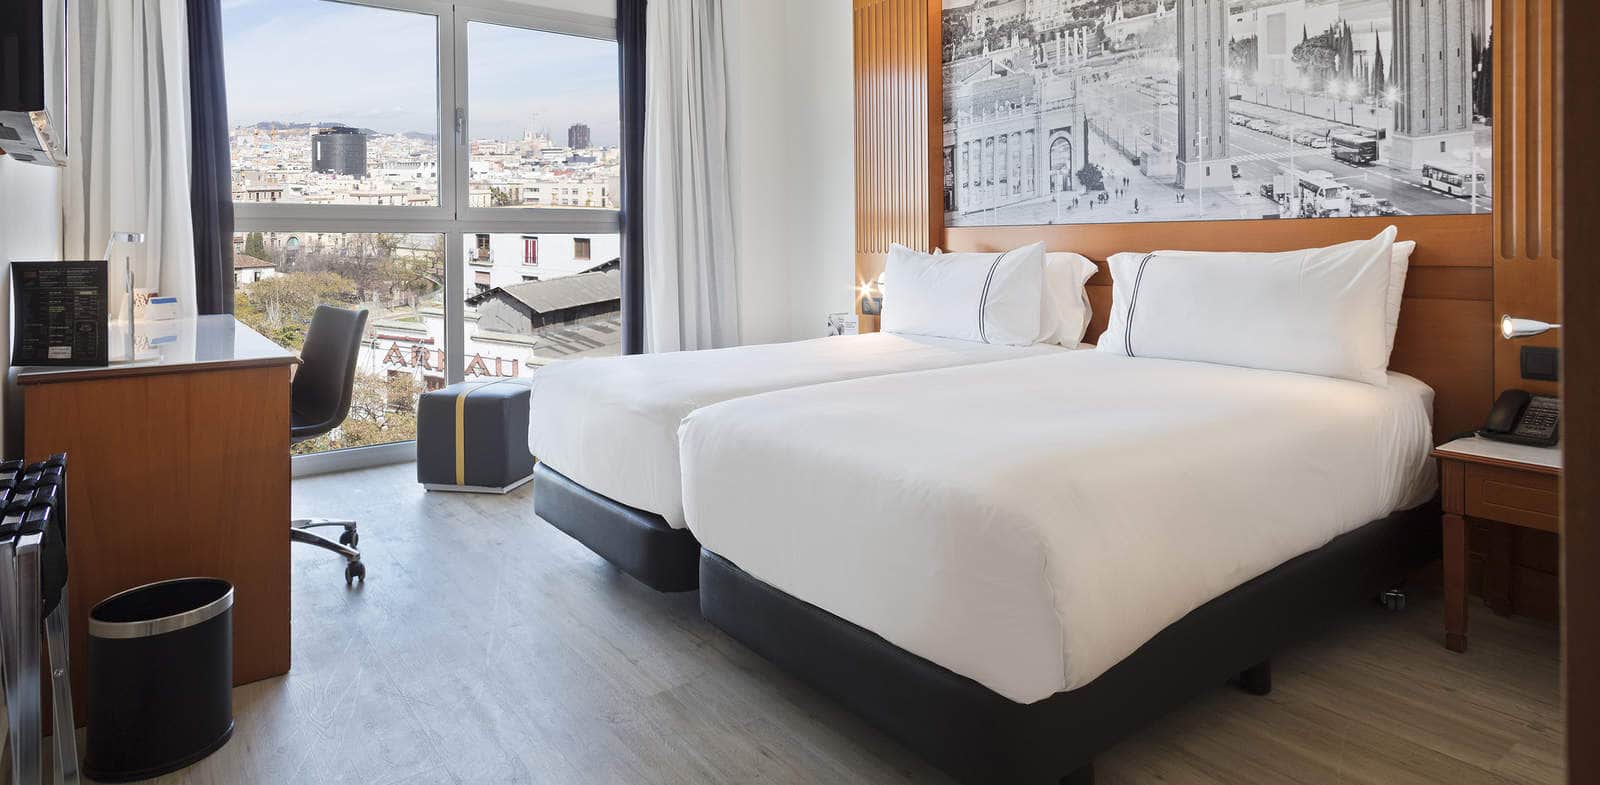 101aHotelBarcelonaApolo_Affiliated-Standard-Room-Twin_D-copy.jpg